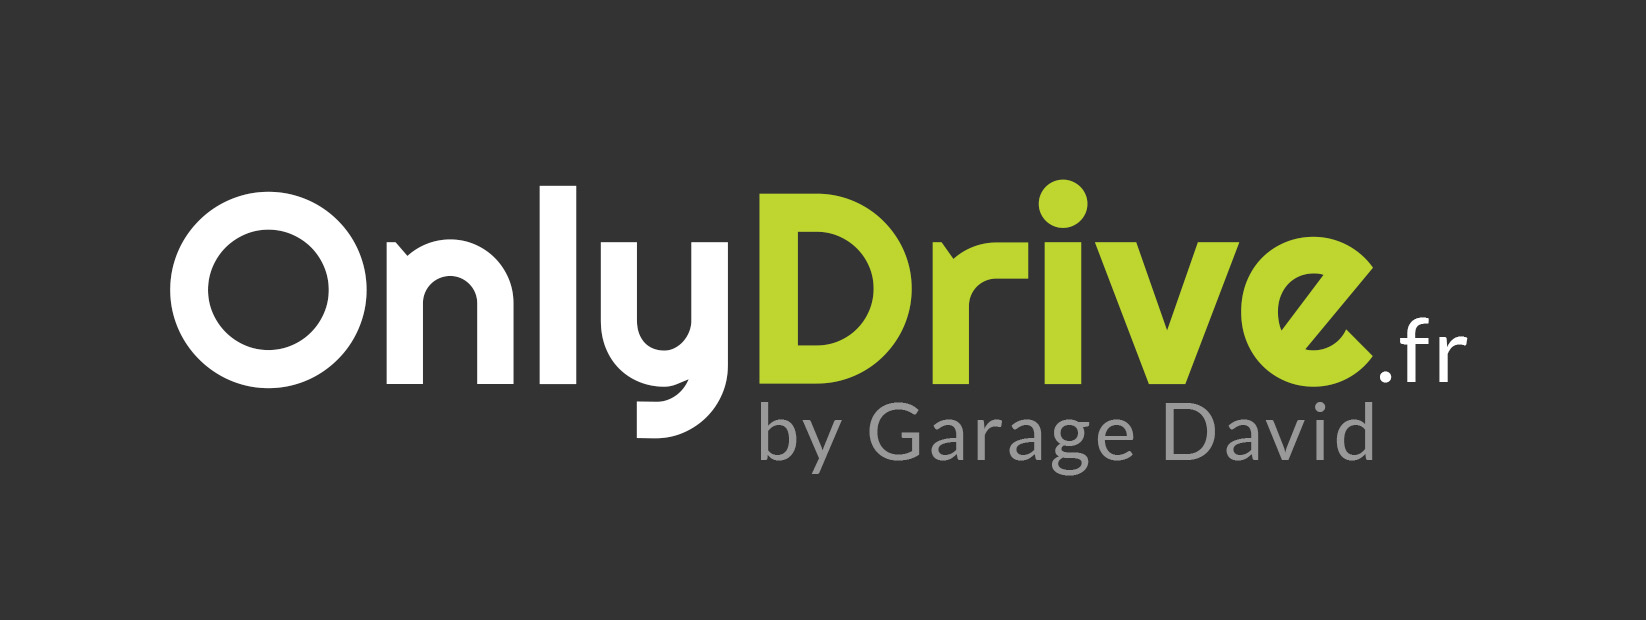 LOGO_ONLY_DRIVE